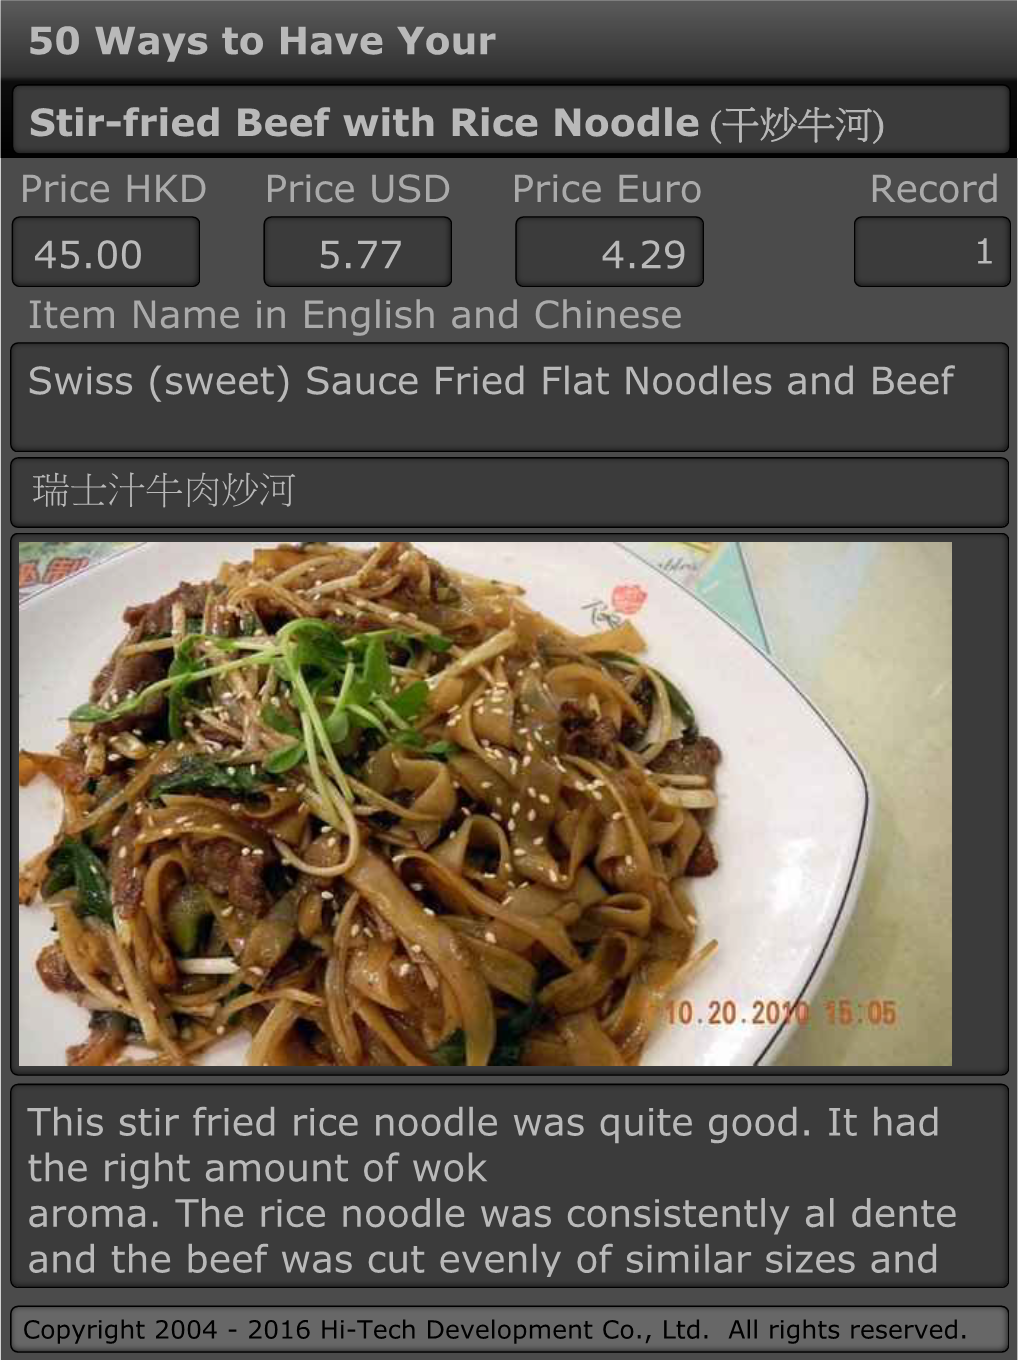 50 Ways to Have Your Stir-Fried Beef with Rice Noodle (干炒牛河) 45.00